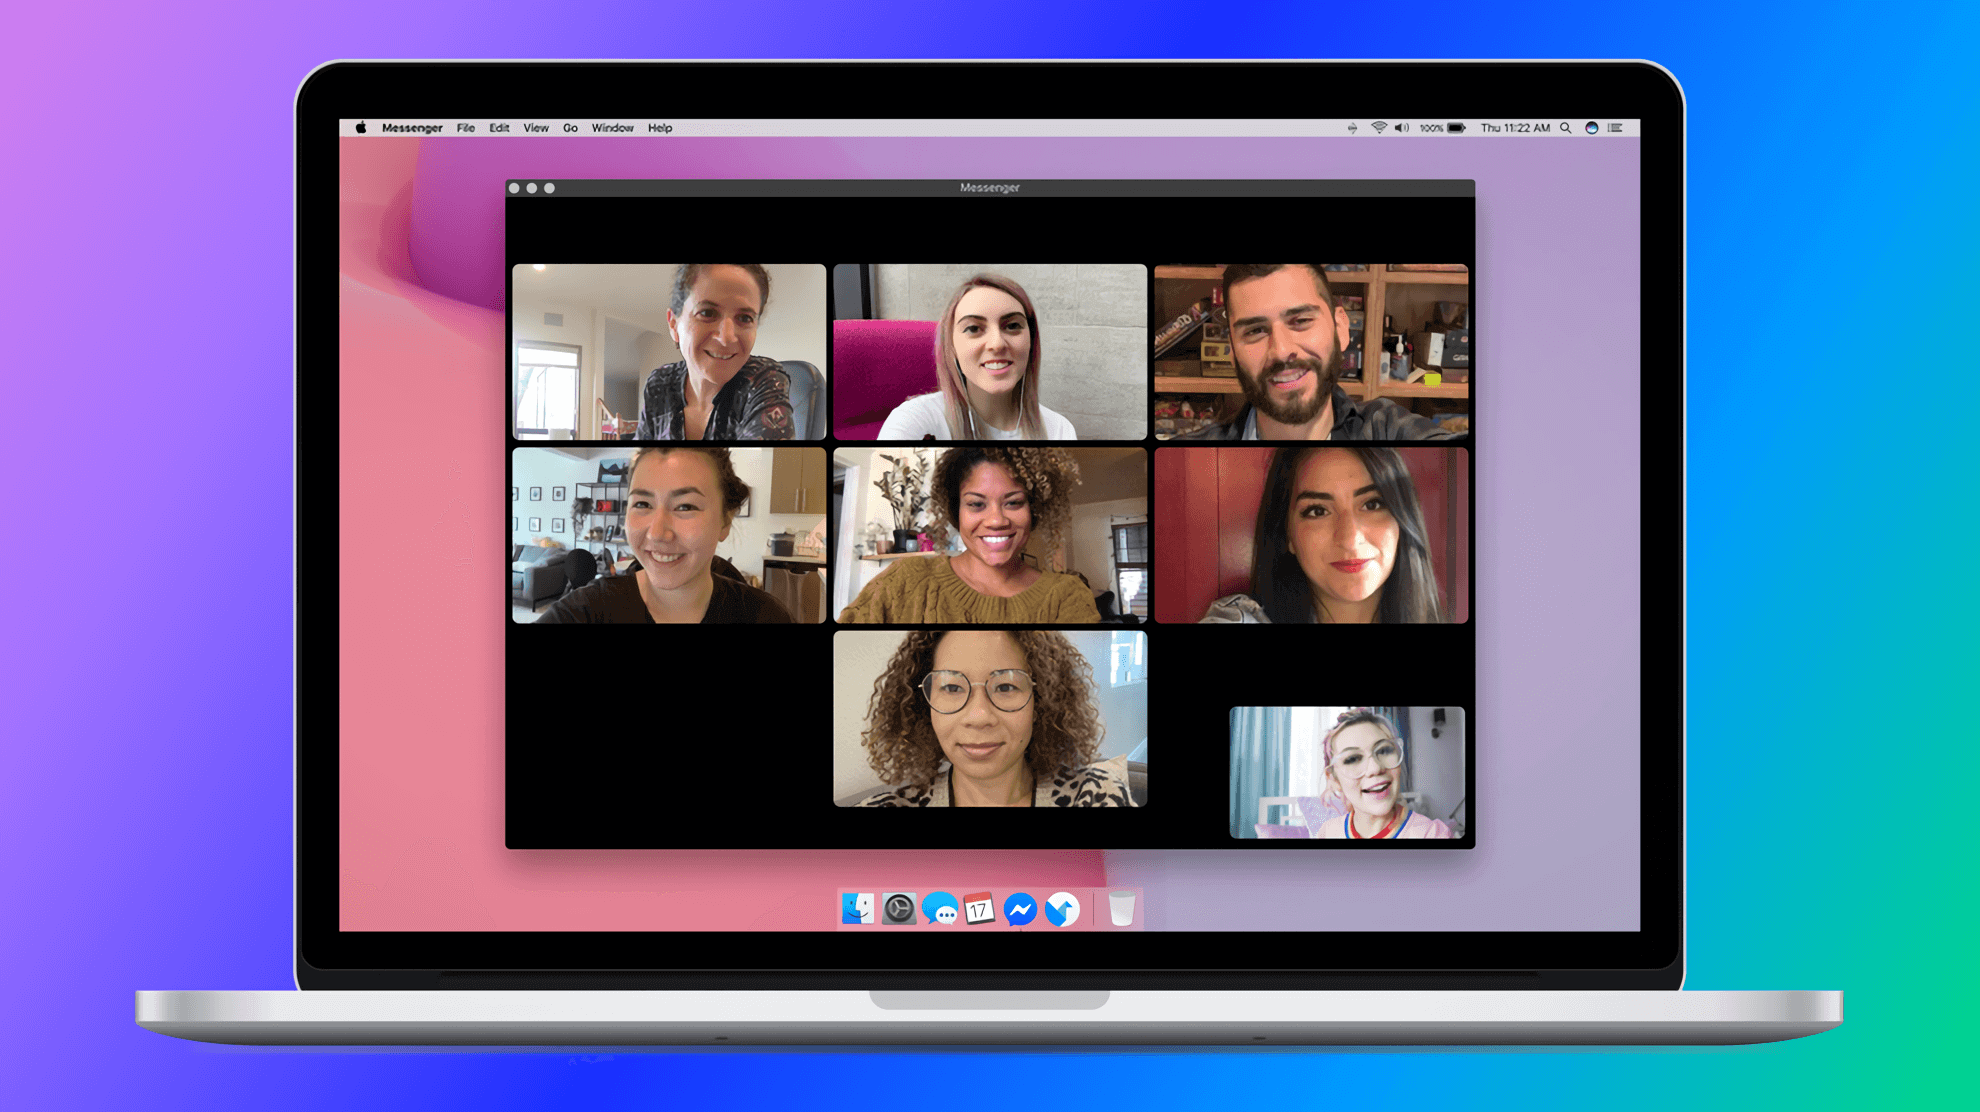 Facebook launches desktop app for group video calls and chats